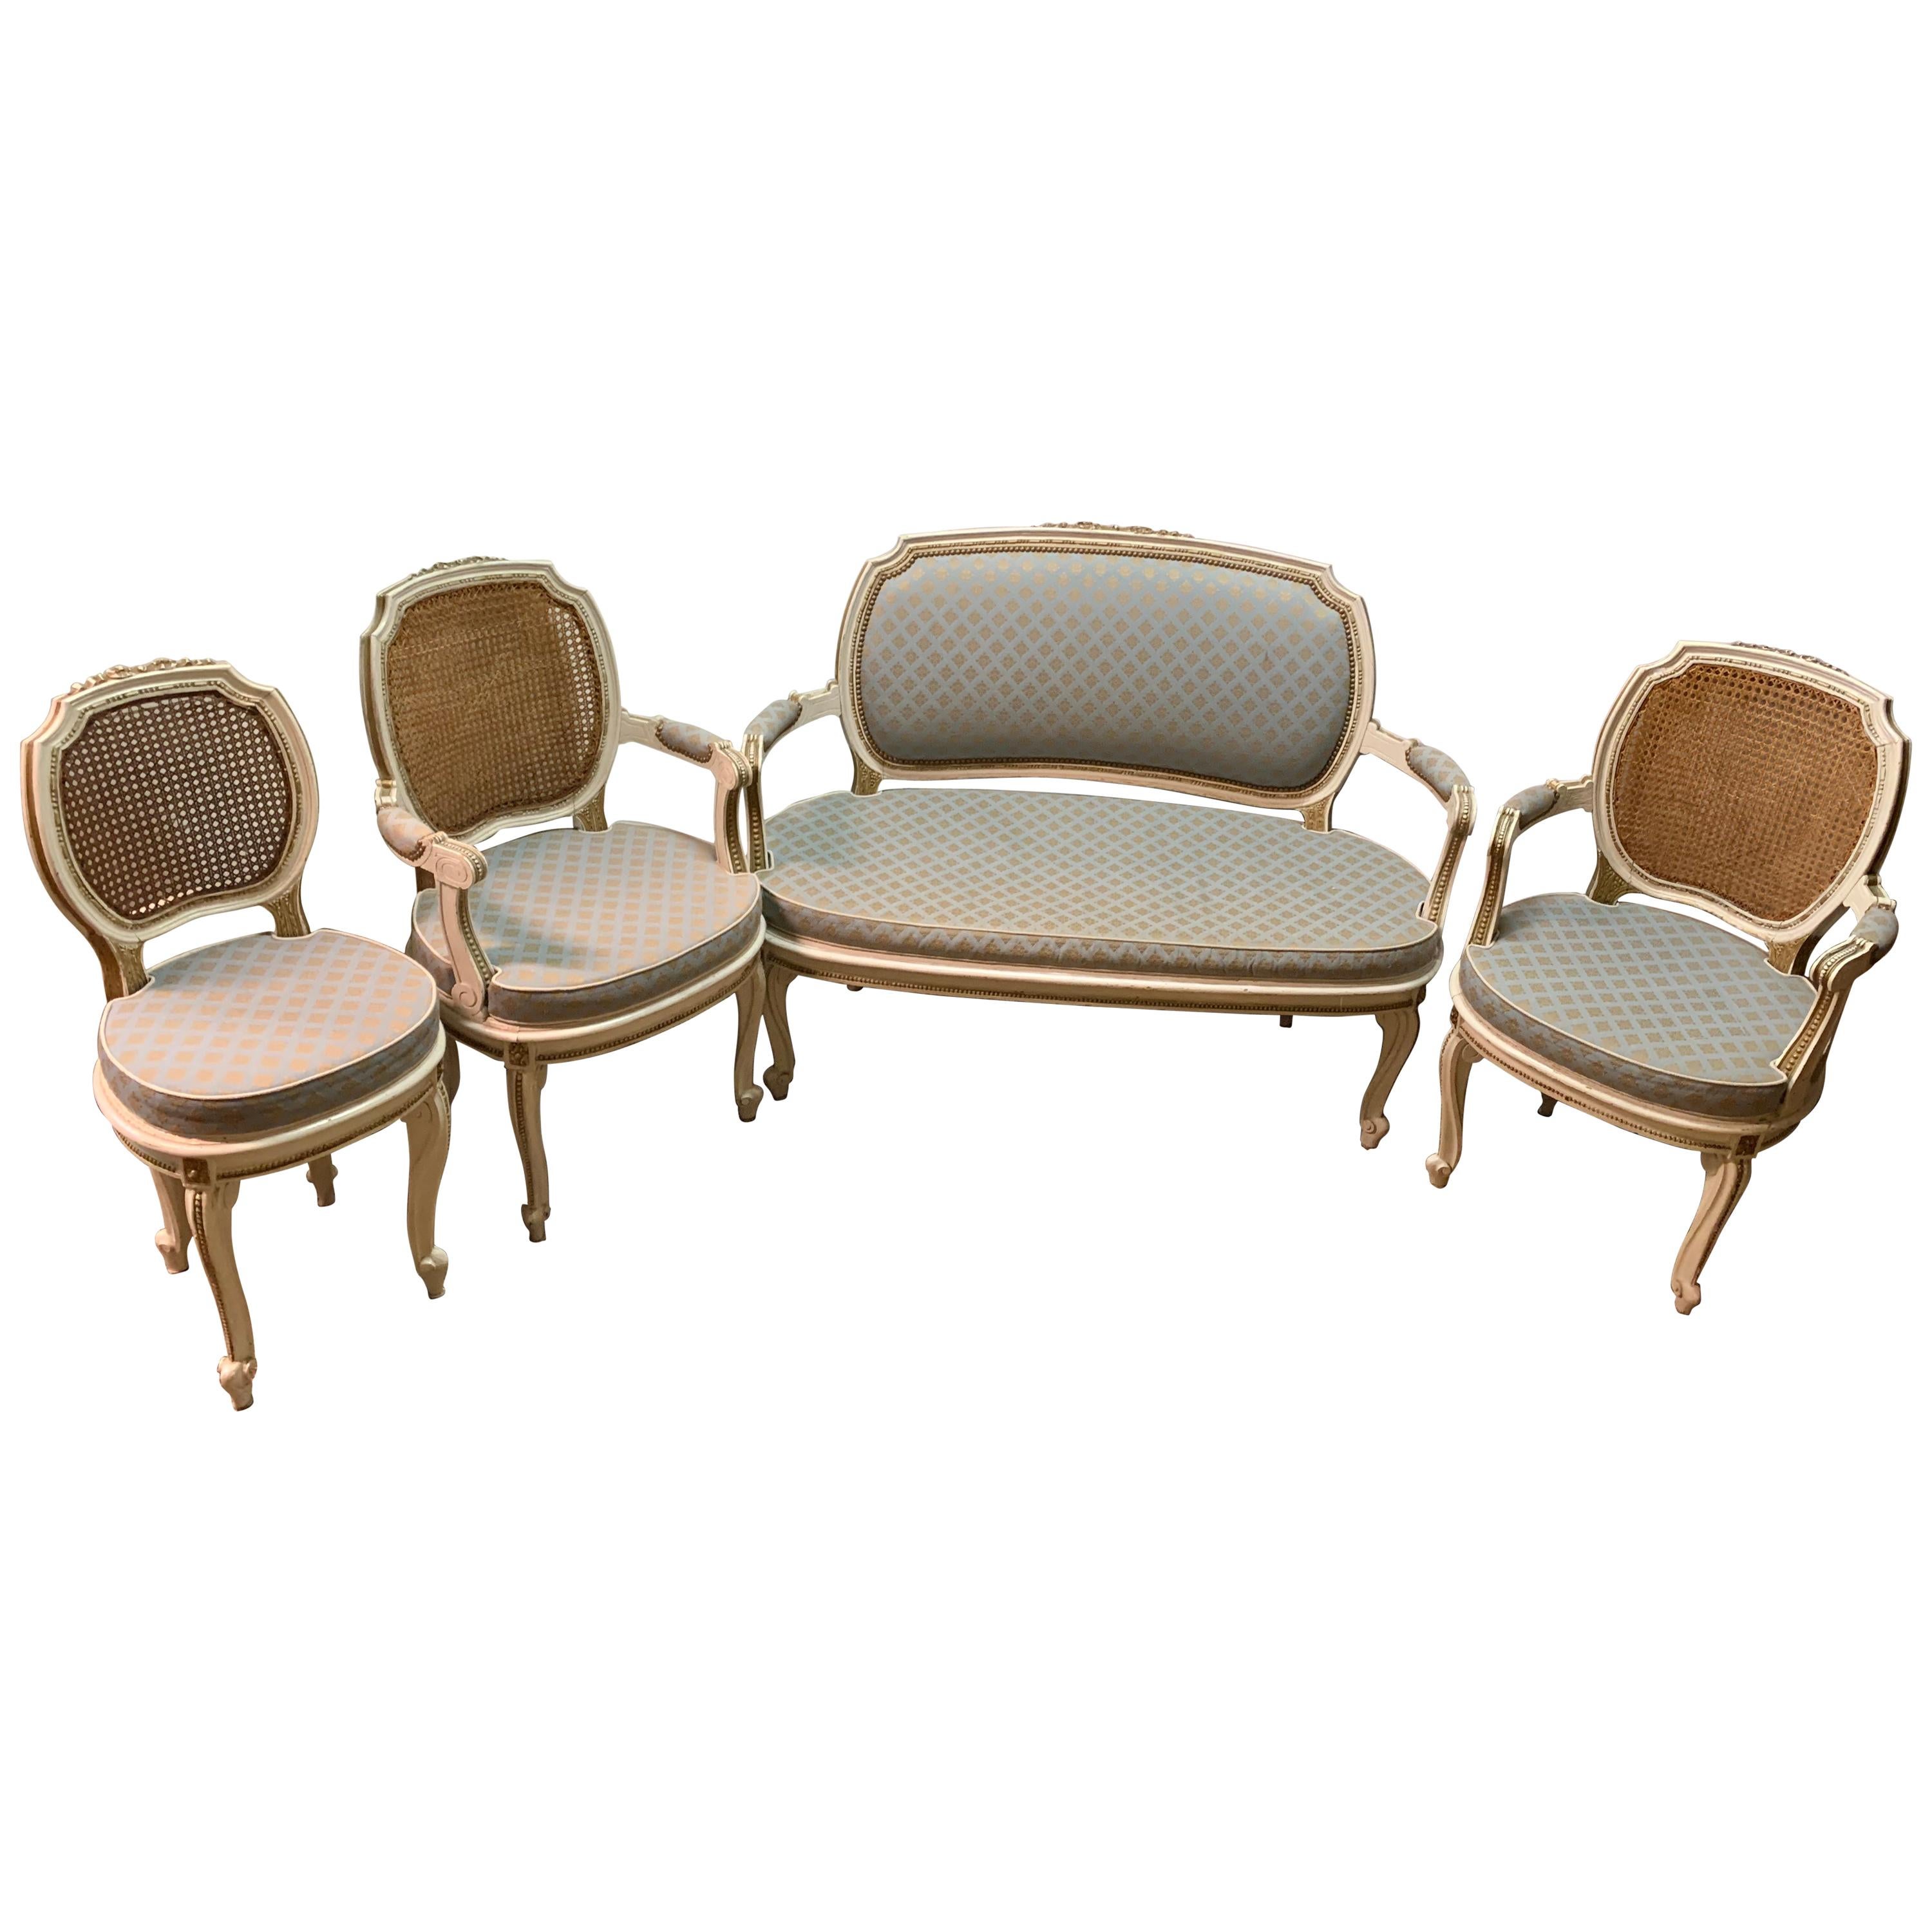 Louis XV Style Salon Four Piece, Pair Armchairs, Settee and Side Chair, Painted